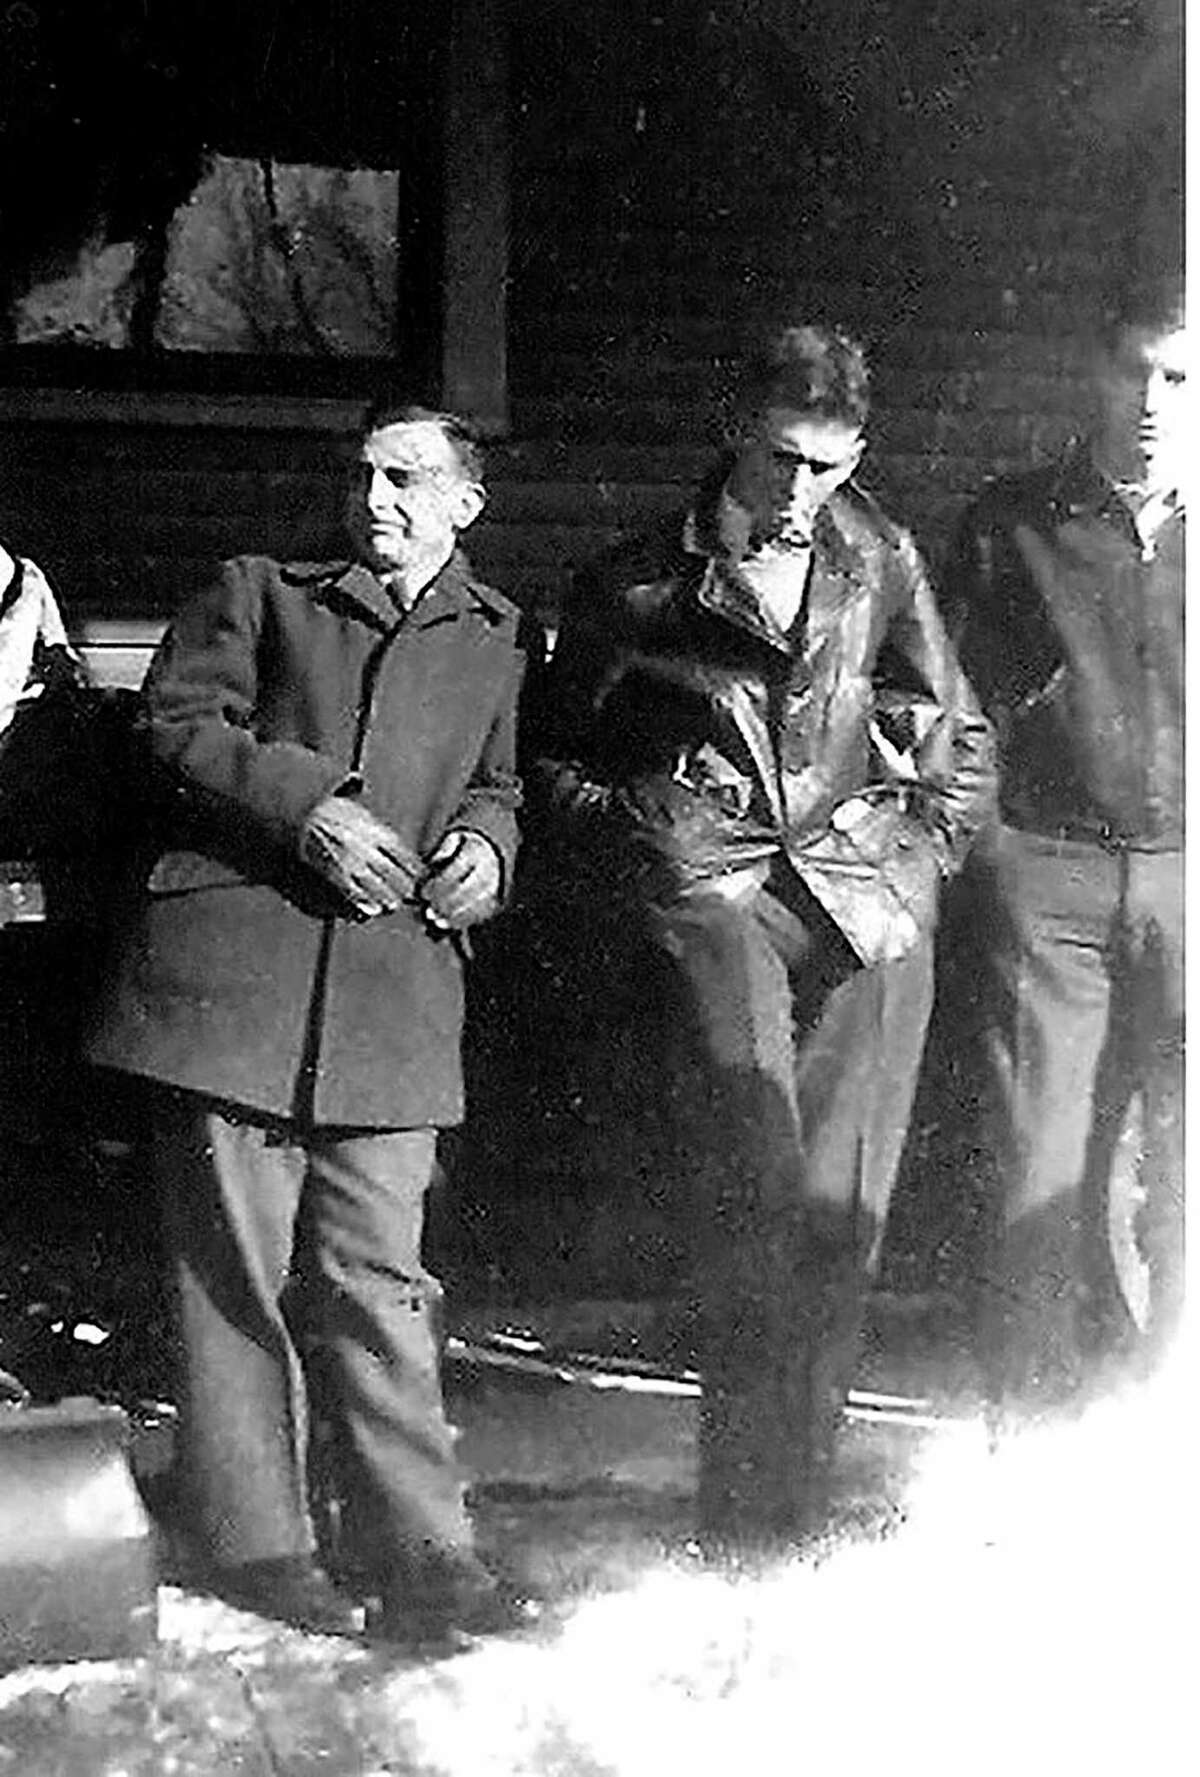 Ceo Bauer, Rolland Hill and Howard Berry wait at the train station in Alma as the head off to the army. (Courtesy photo/Bruce Garlock)